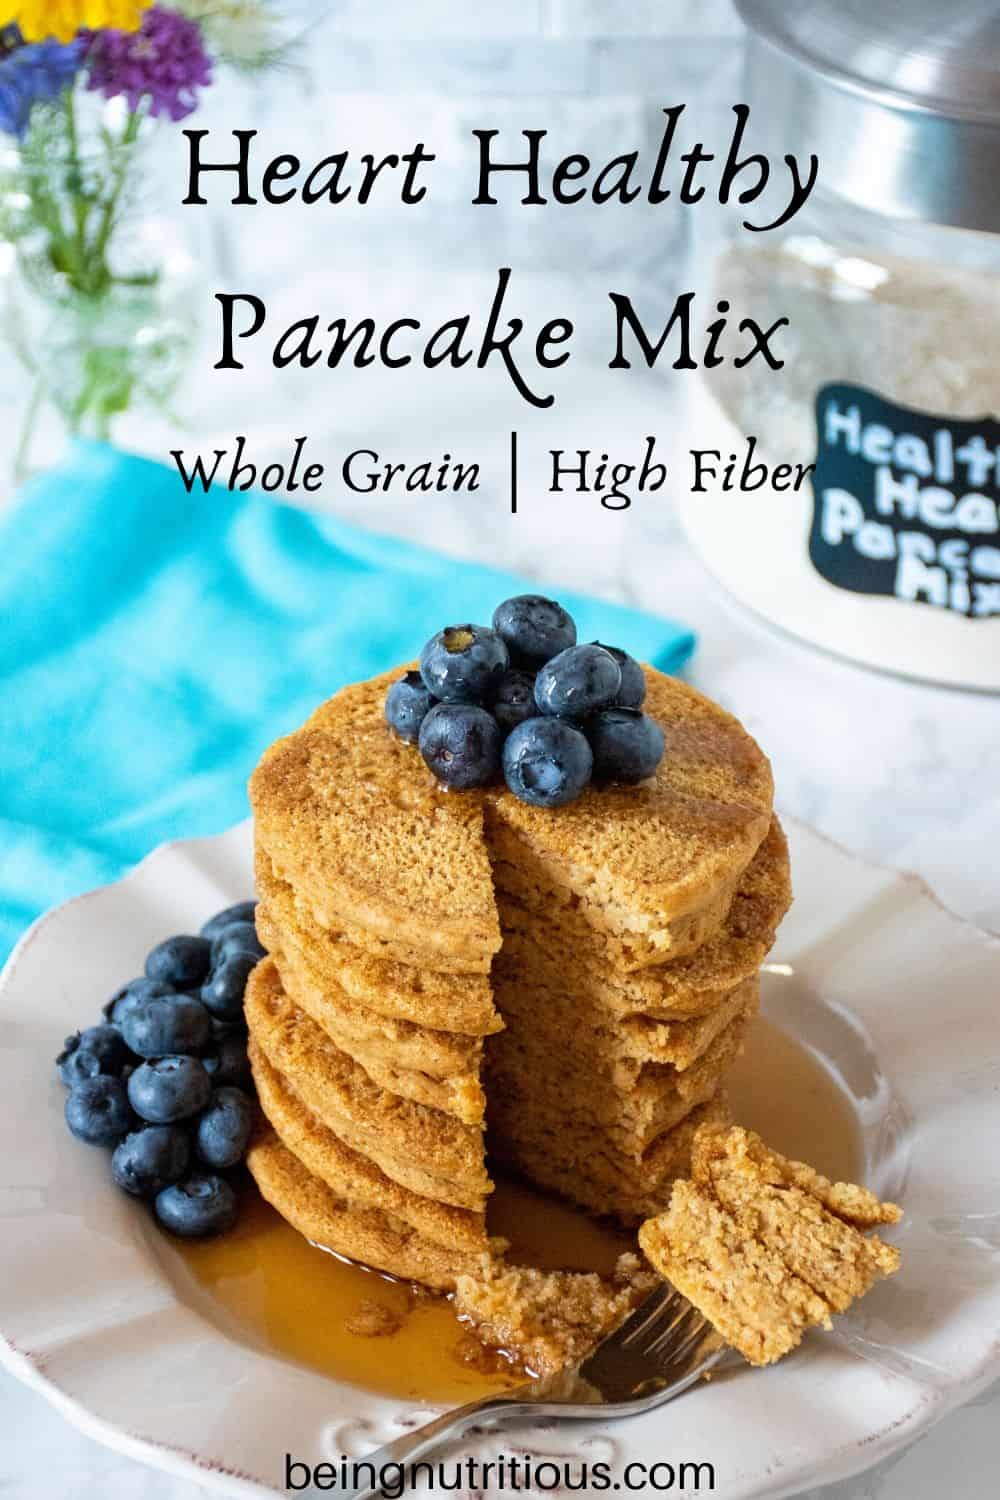 Stack of 6 whole wheat pancakes, with a pile of fresh blueberries on top, and syrup poured over. A fork with cut pieces of pancakes on it lies in front of the stack. Glass jar of heart healthy pancake mix is visible in the background with a bouquet of flowers.